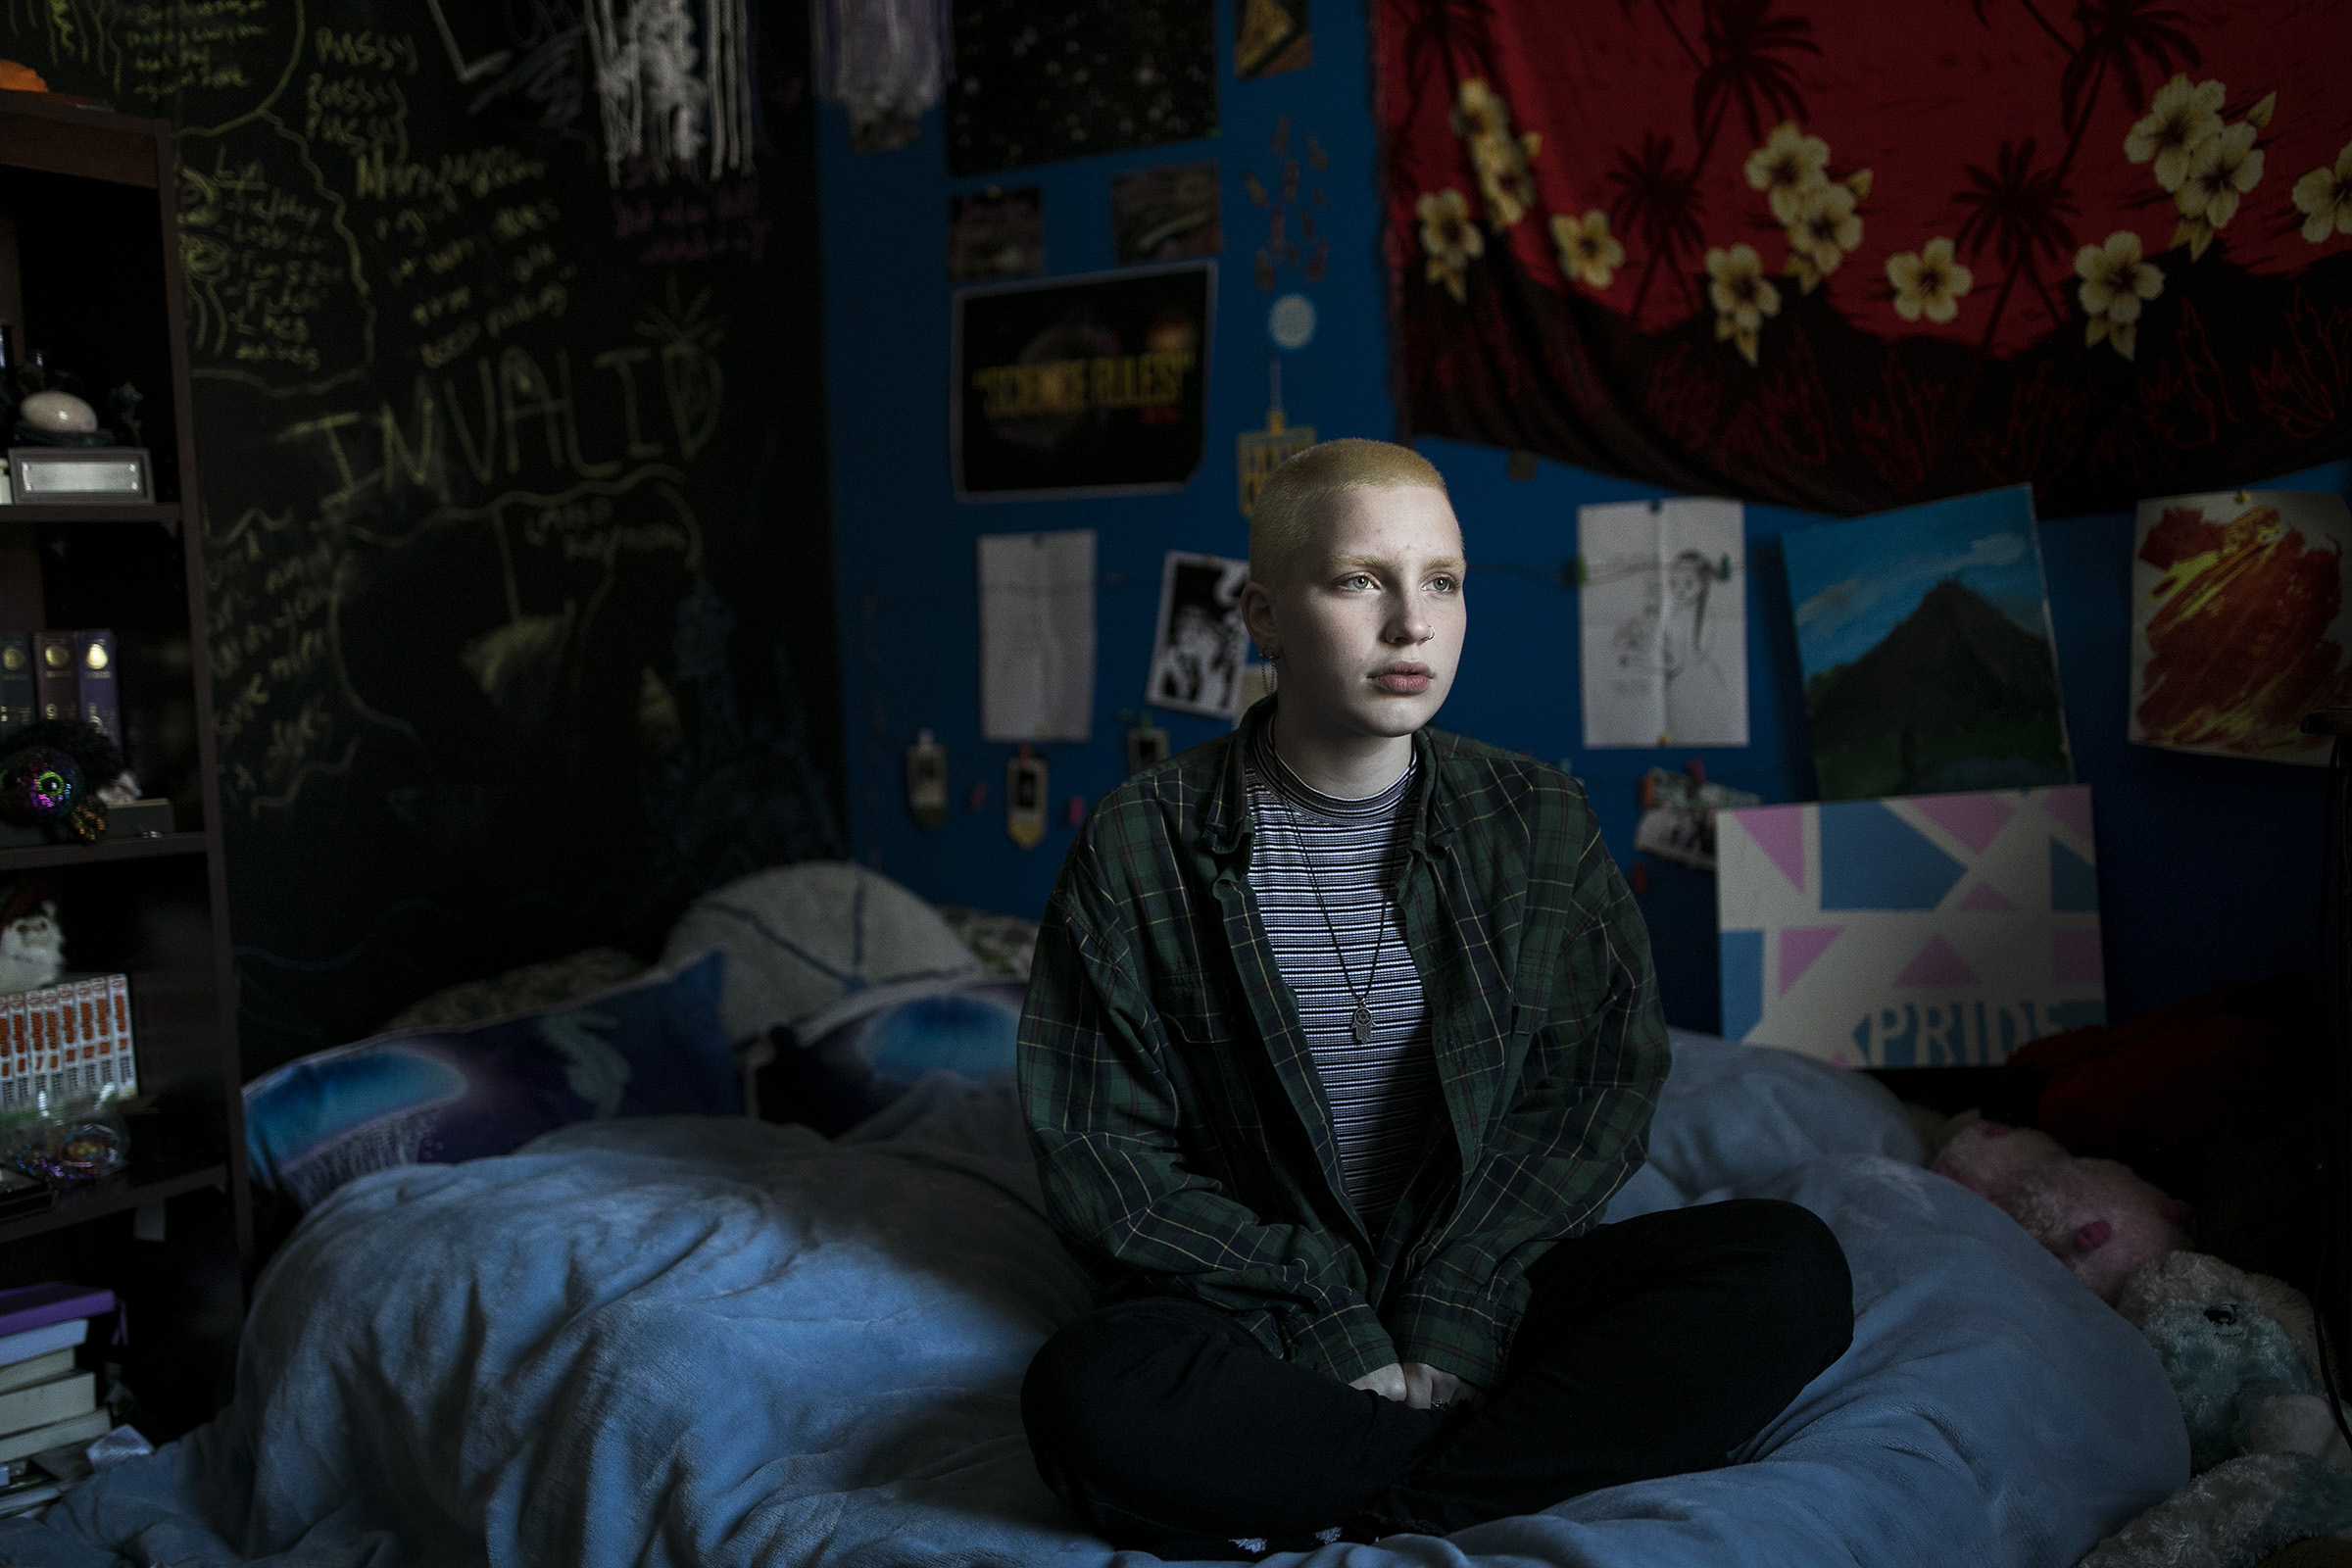 Aidyn Sucec sits in his bedroom in Brownsburg, Indiana on Nov. 11, 2019. (Maddie McGarvey for TIME)